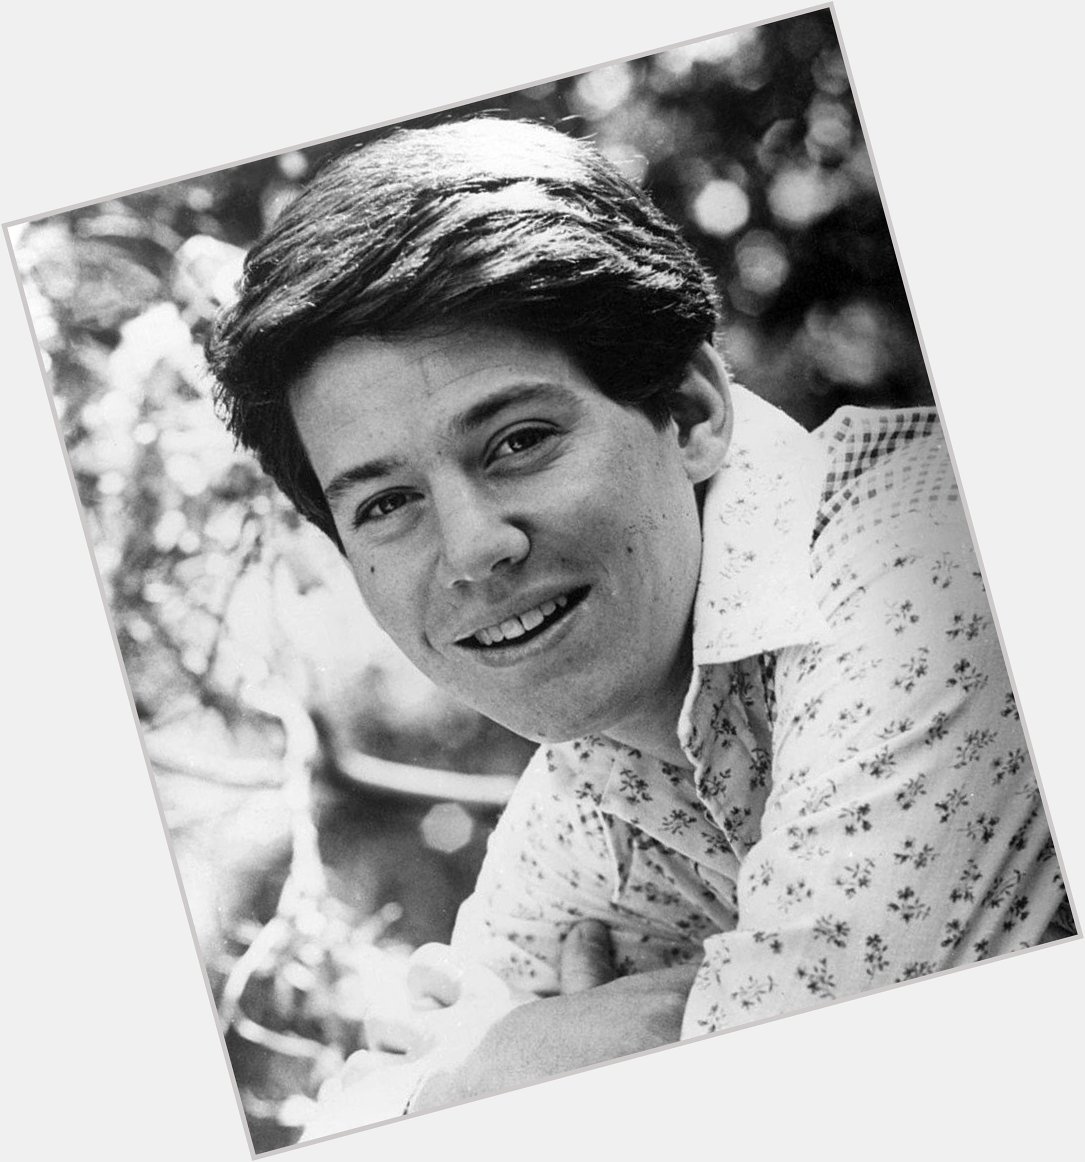 Happy Birthday to Anson Williams who turns 70 today! 